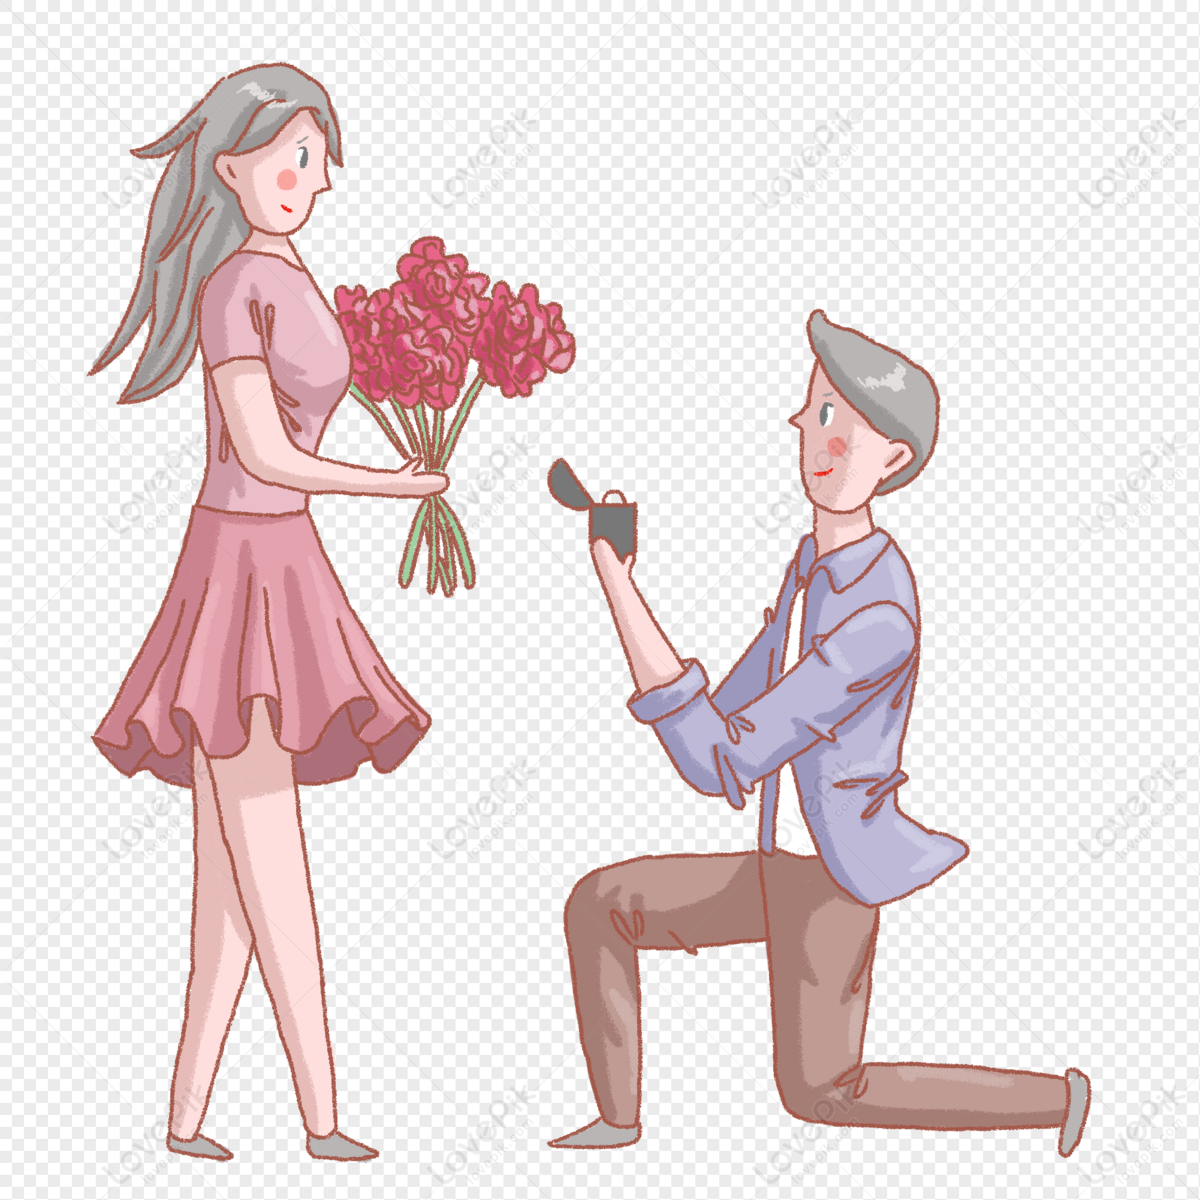 In The Confession Season Boys Propose To Girls PNG Image And ...